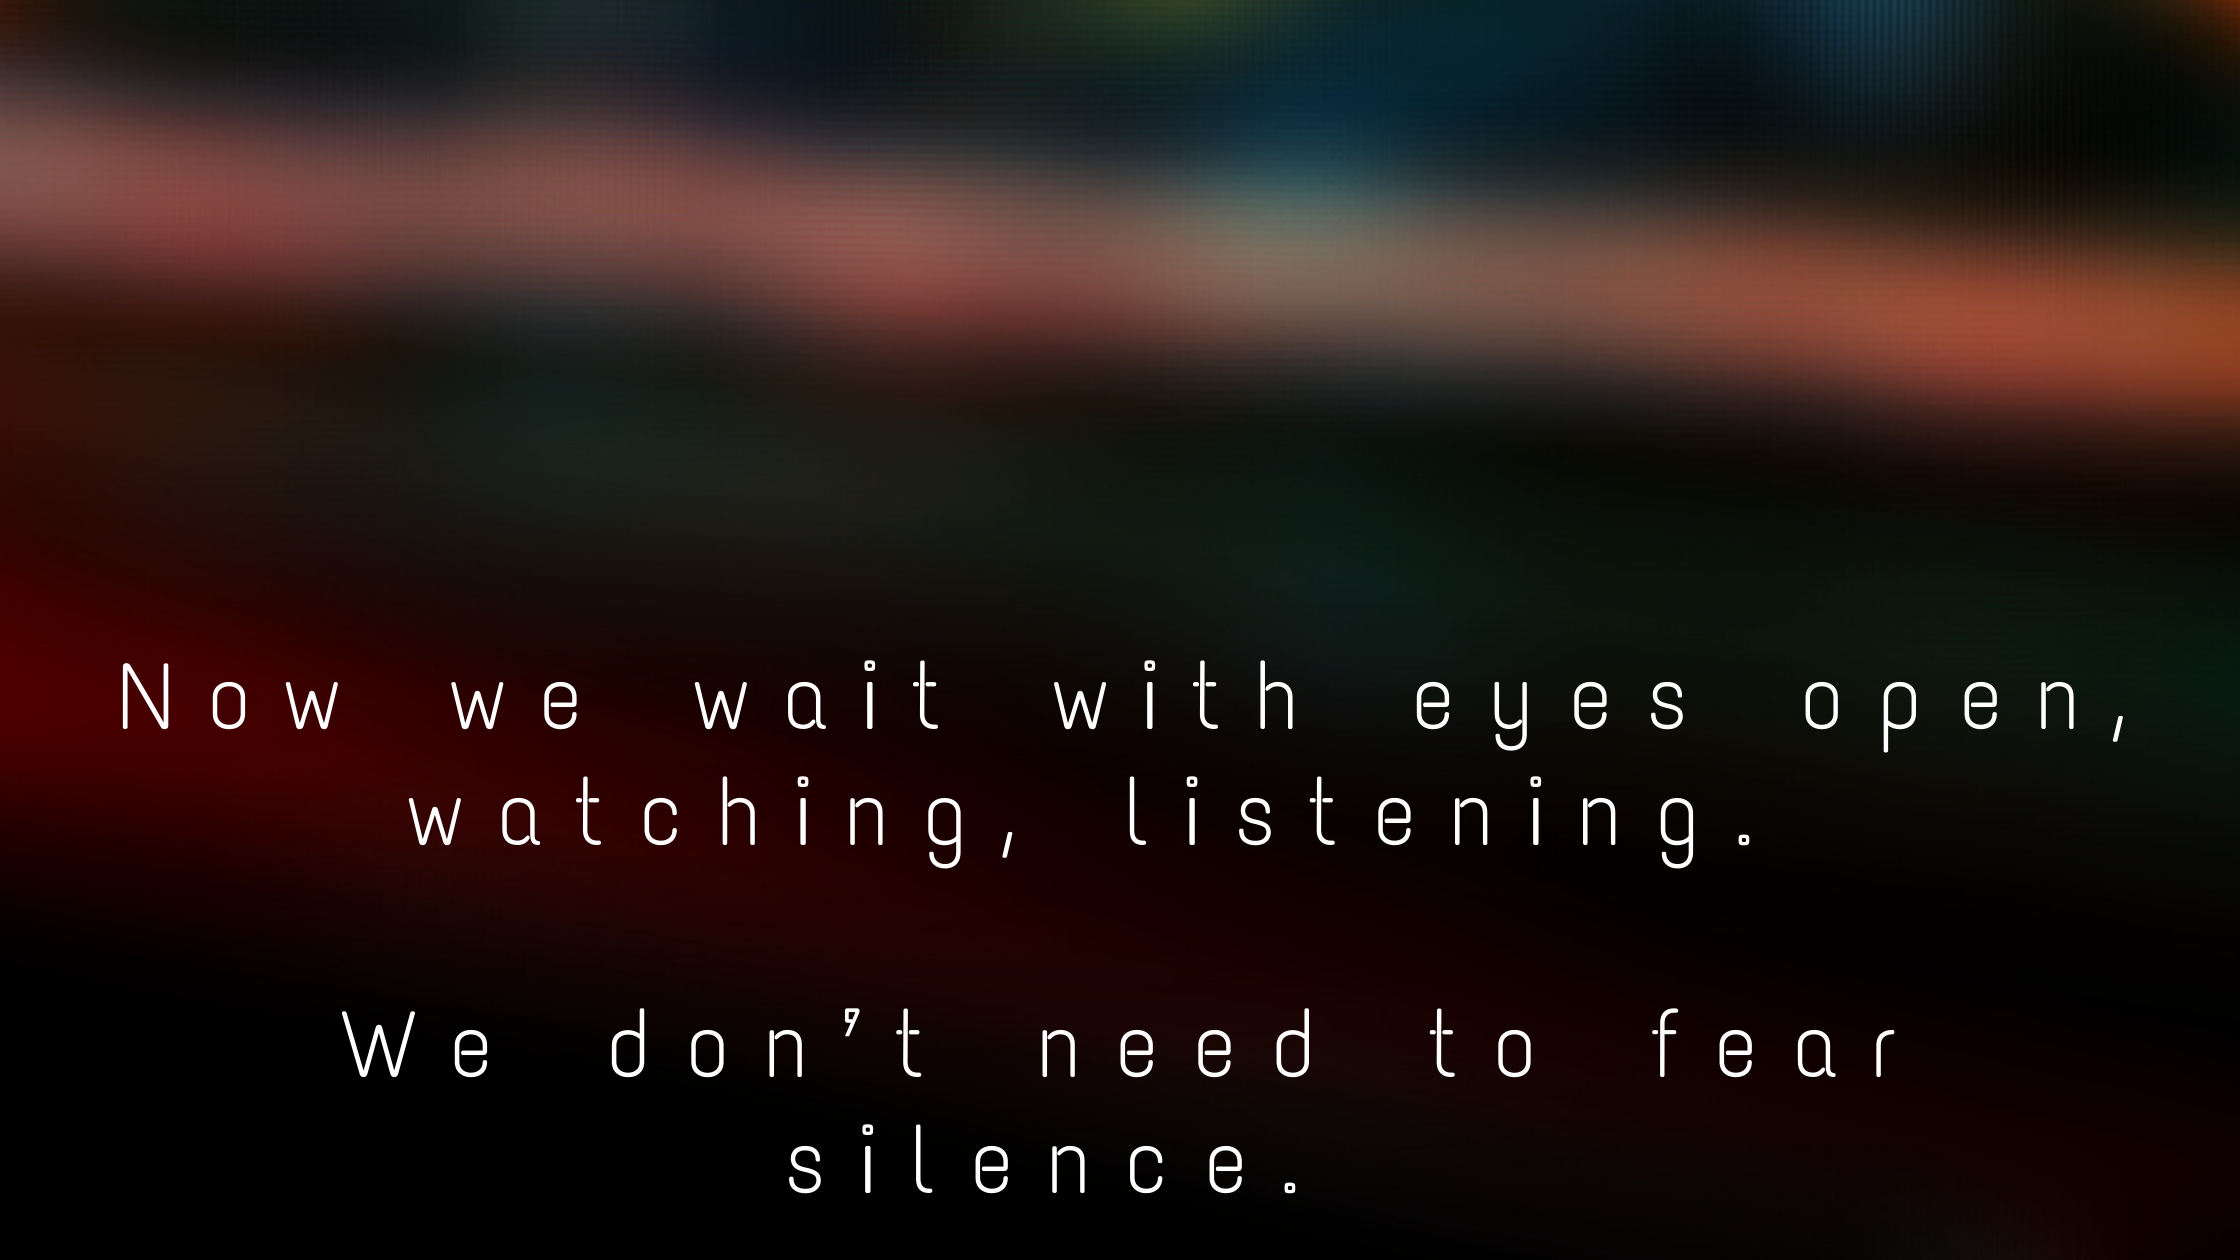 Now we wait with eyes open, watching, listening. We don’t need to fear silence.